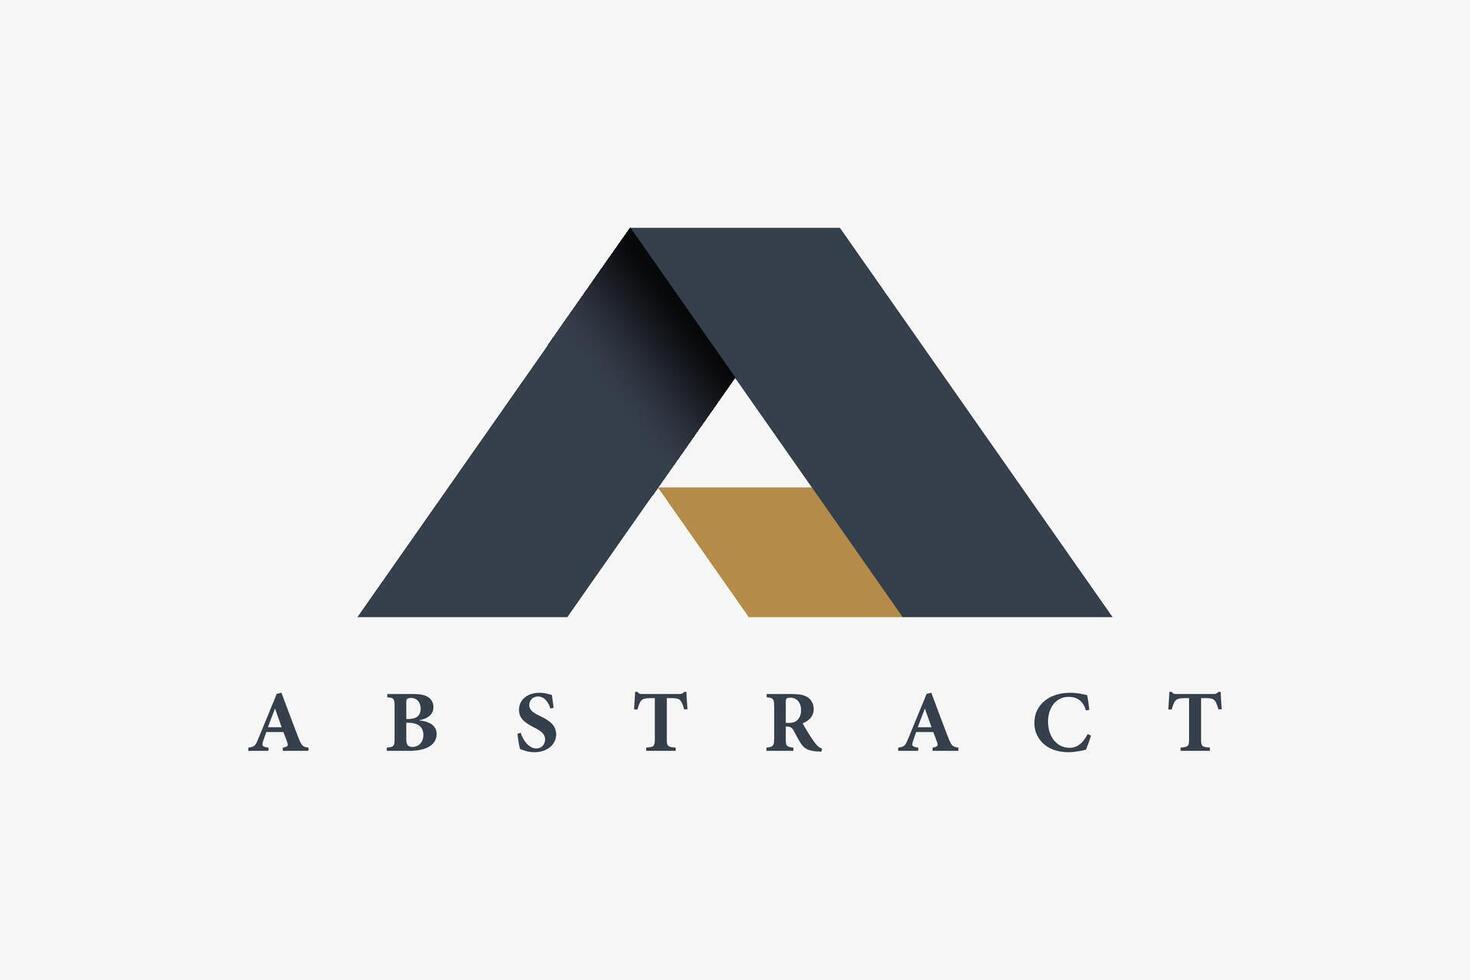 Minimalist Initial Letter A Abstract geometric Logo. Minimalist Modern Logo Usable for Business, Branding, Identity, Marketing, that Related with Letter A. Flat Vector Logo Design Template Element.